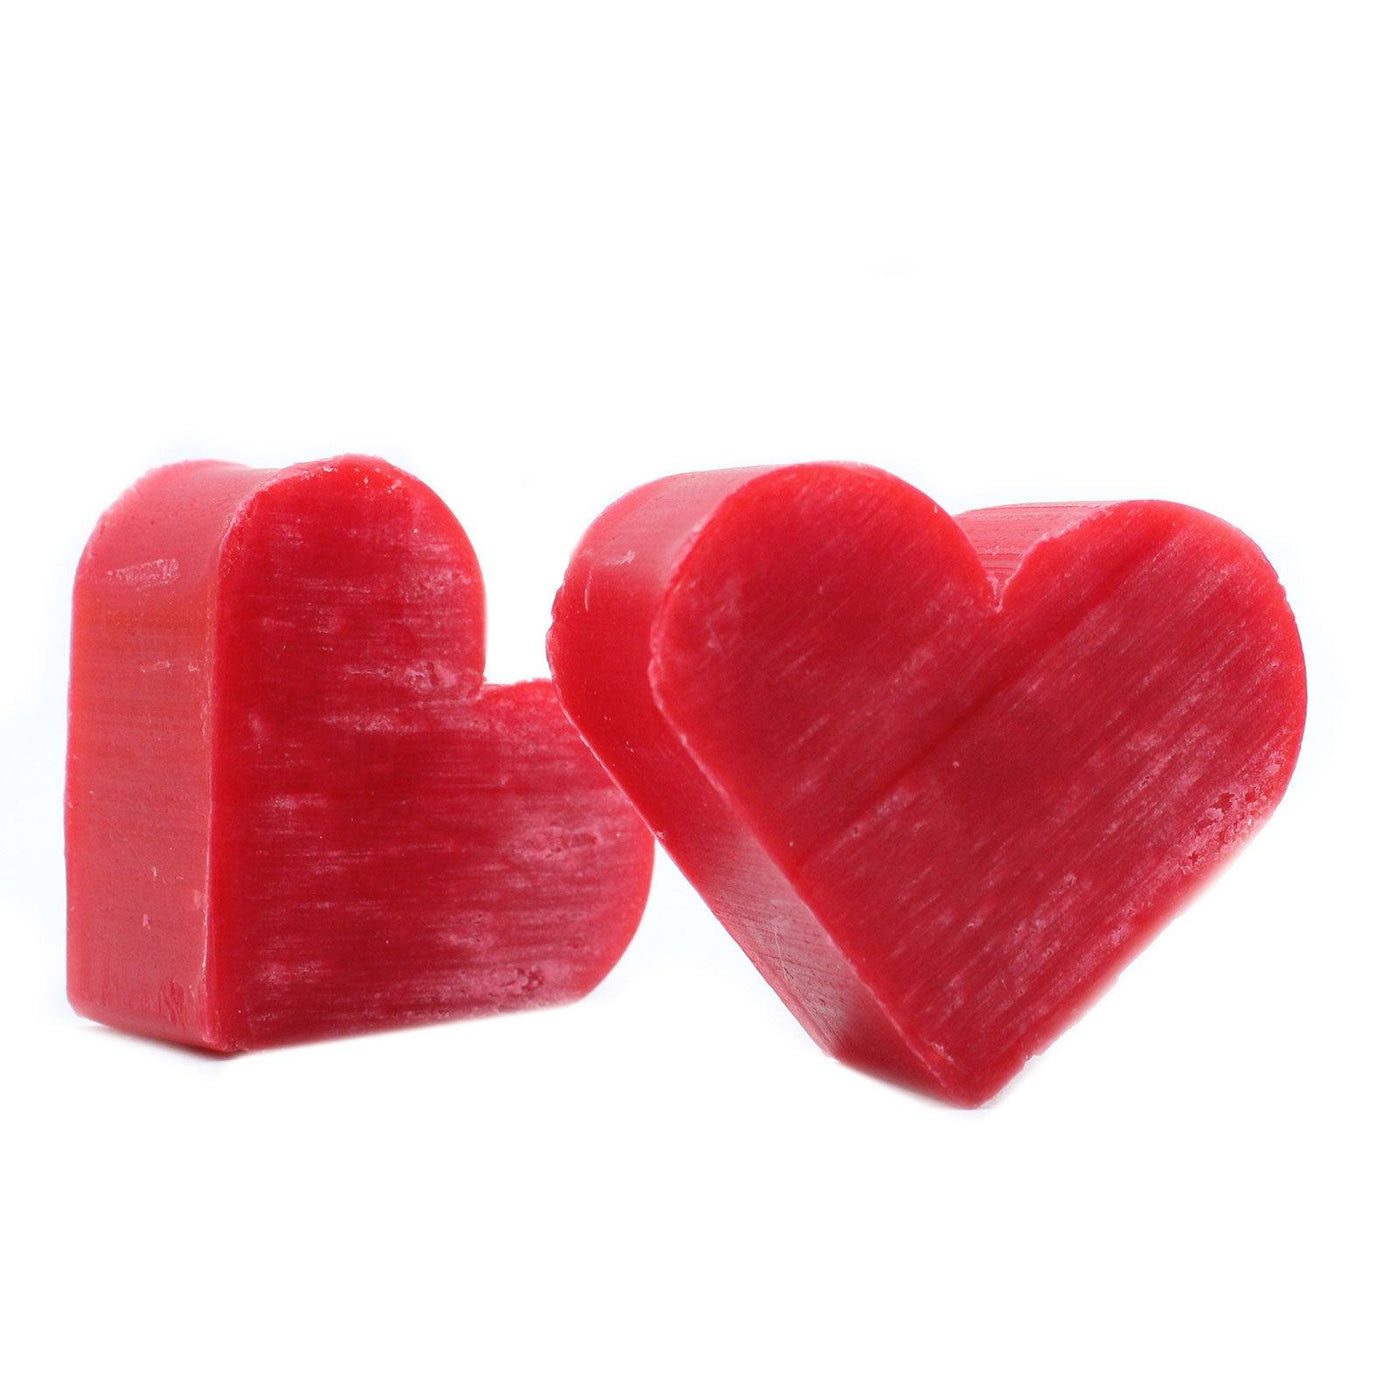 10x Red Heart Shaped Paraben Free Fragranced Guest Soaps - Raspberry.